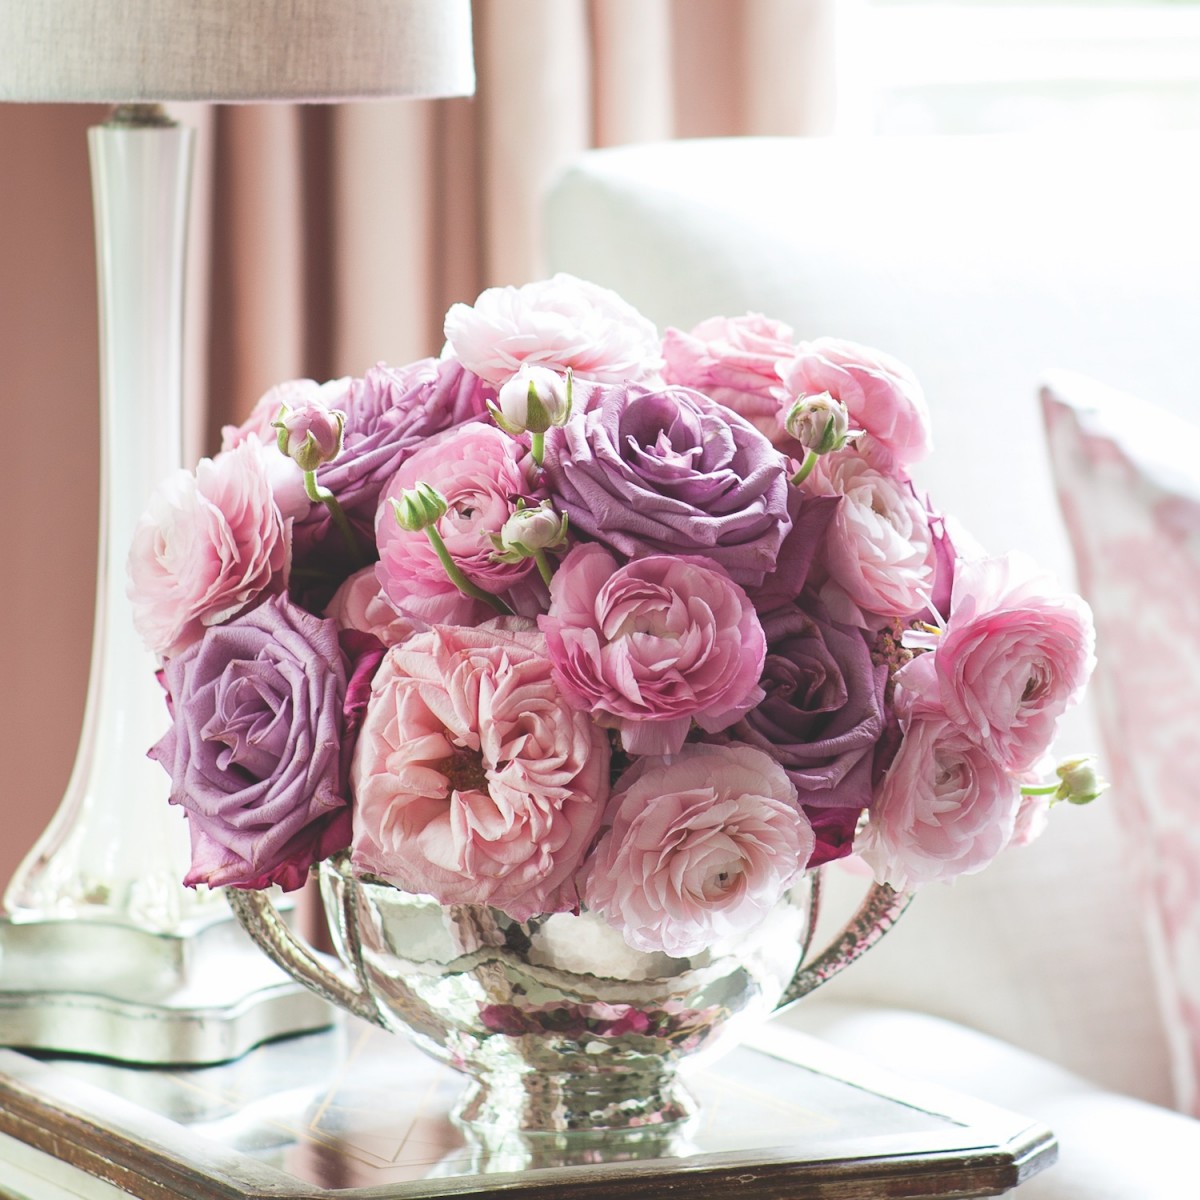 Michal Evans combines pinks with lilac (‘André Le Nôtre’ roses, ‘Lavanda’ roses, and ‘Clooney’ ranunculus)